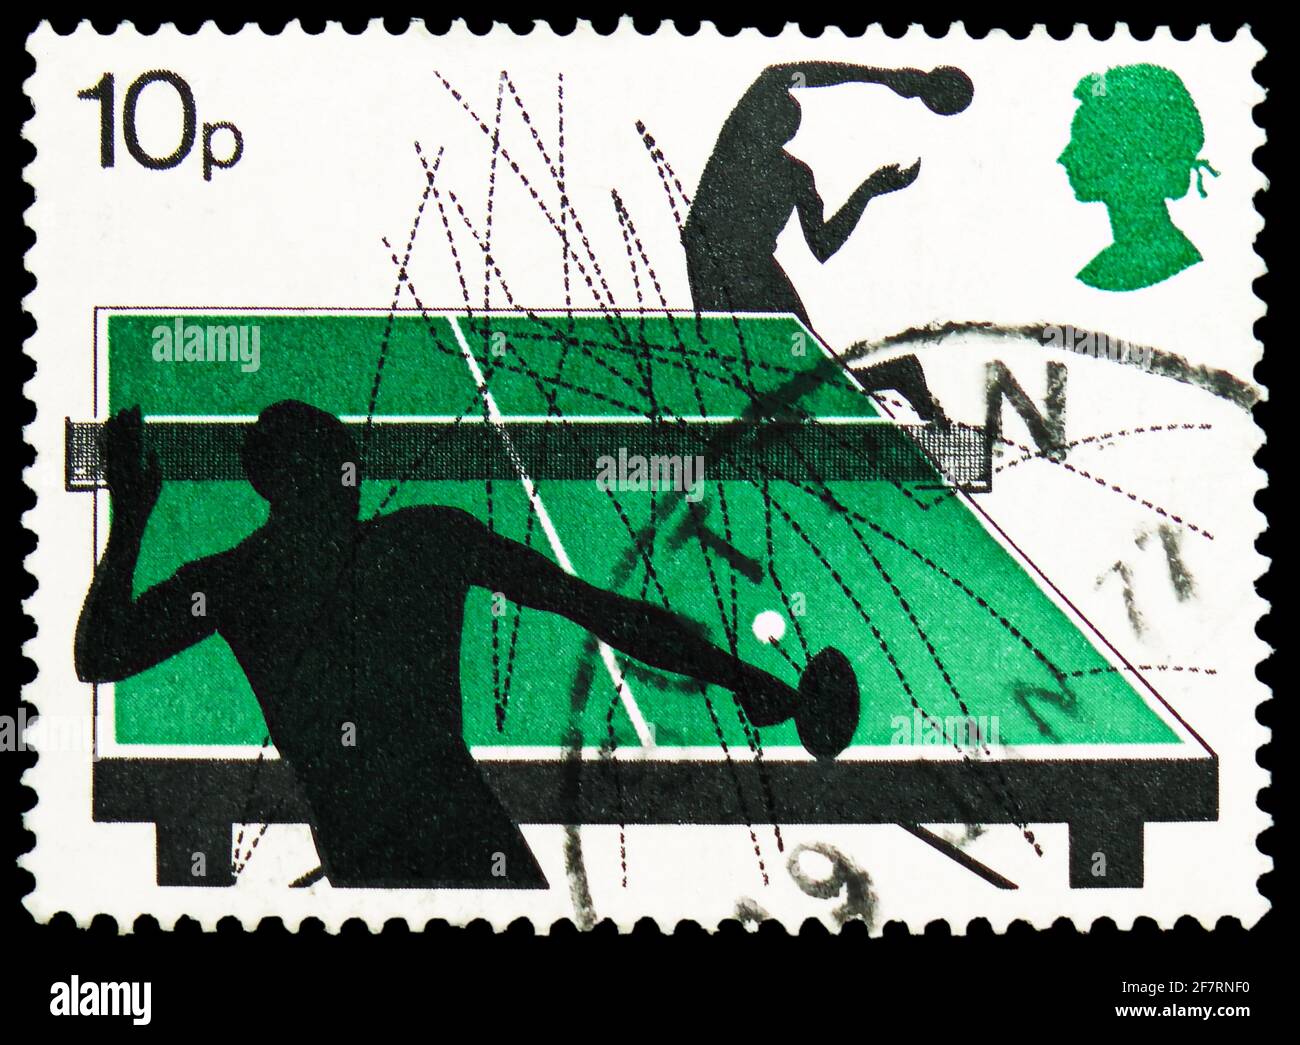 MOSCOW, RUSSIA - JANUARY 17, 2021: Postage stamp printed in United Kingdom shows Table Tennis, Racket sports serie, circa 1977 Stock Photo